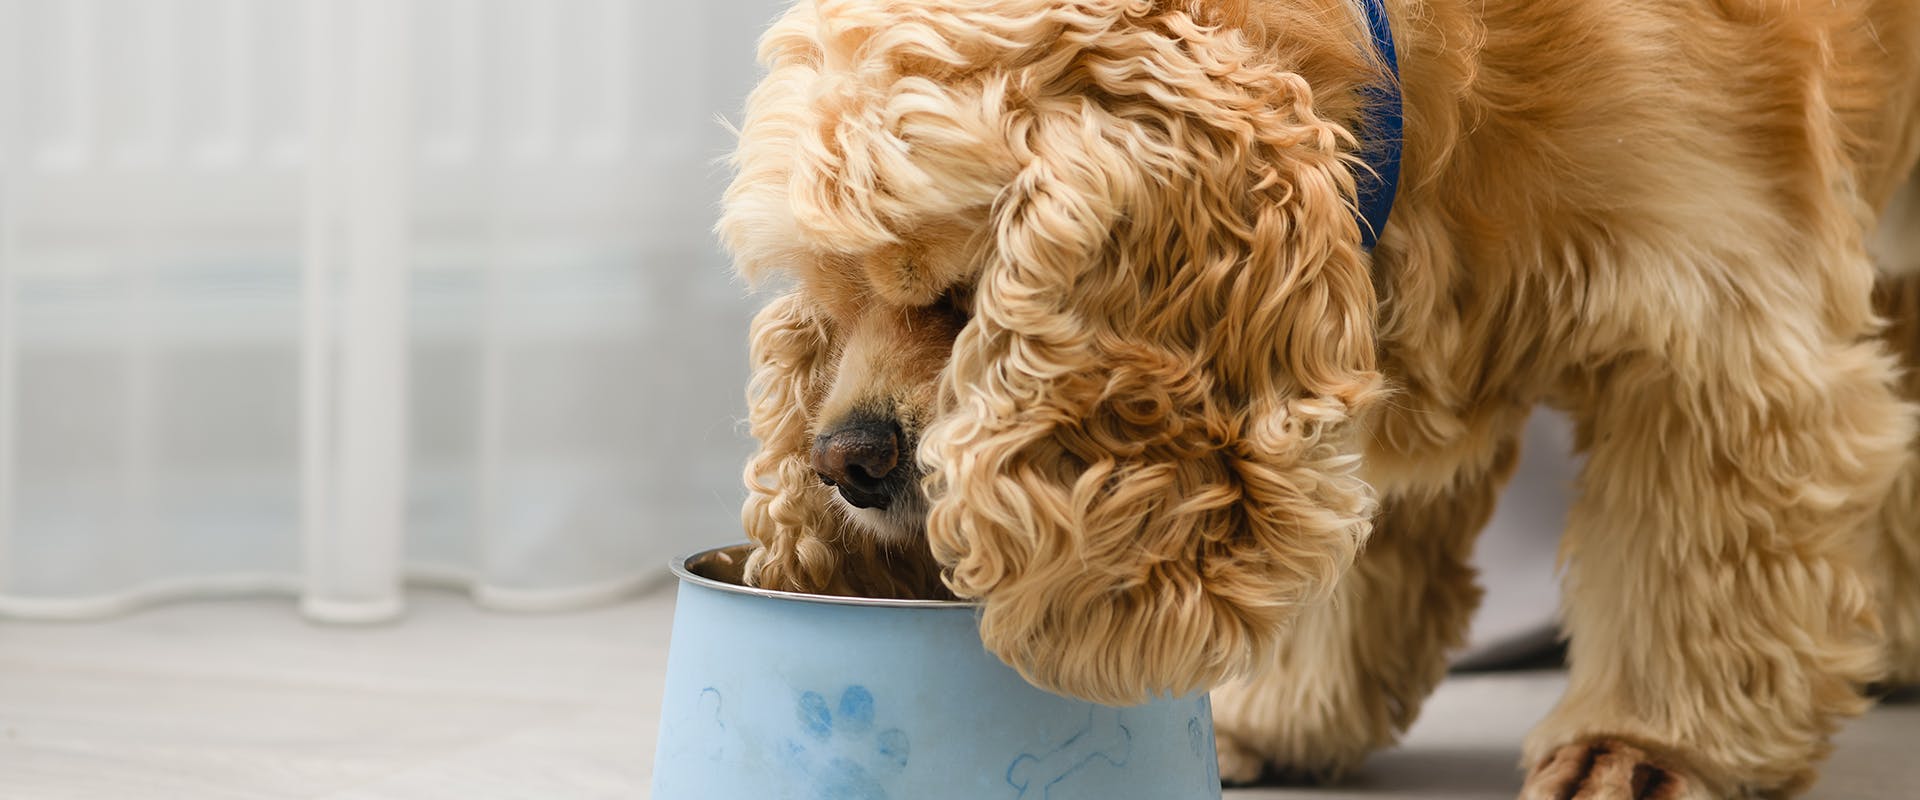 A fluffy dog eating from a bright blue dog bowl